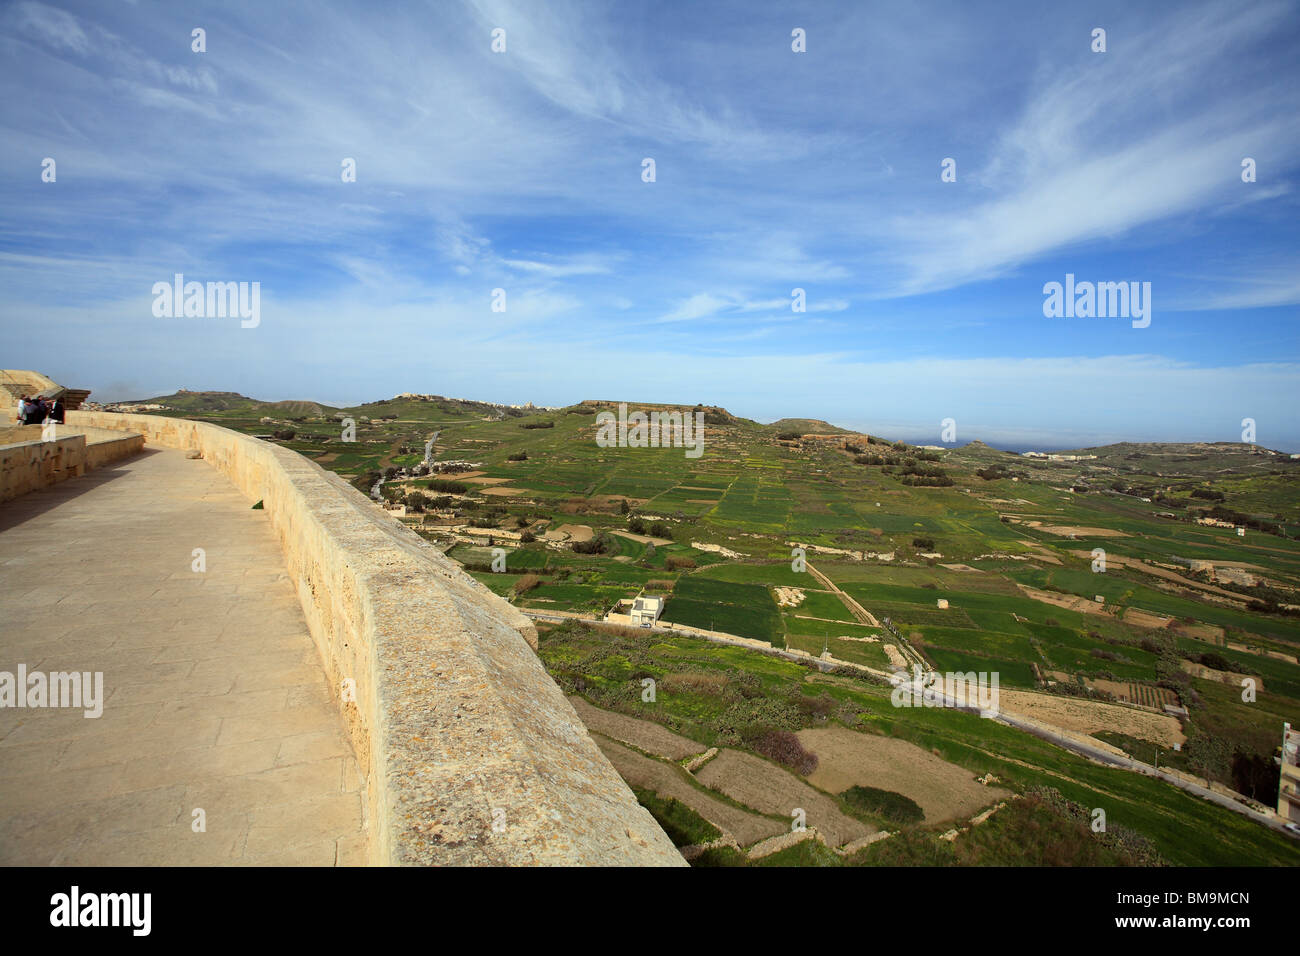 Mdina & Rabat, Malta. A view from city the walls with fields, small hamlets and hills spread out below. Stock Photo